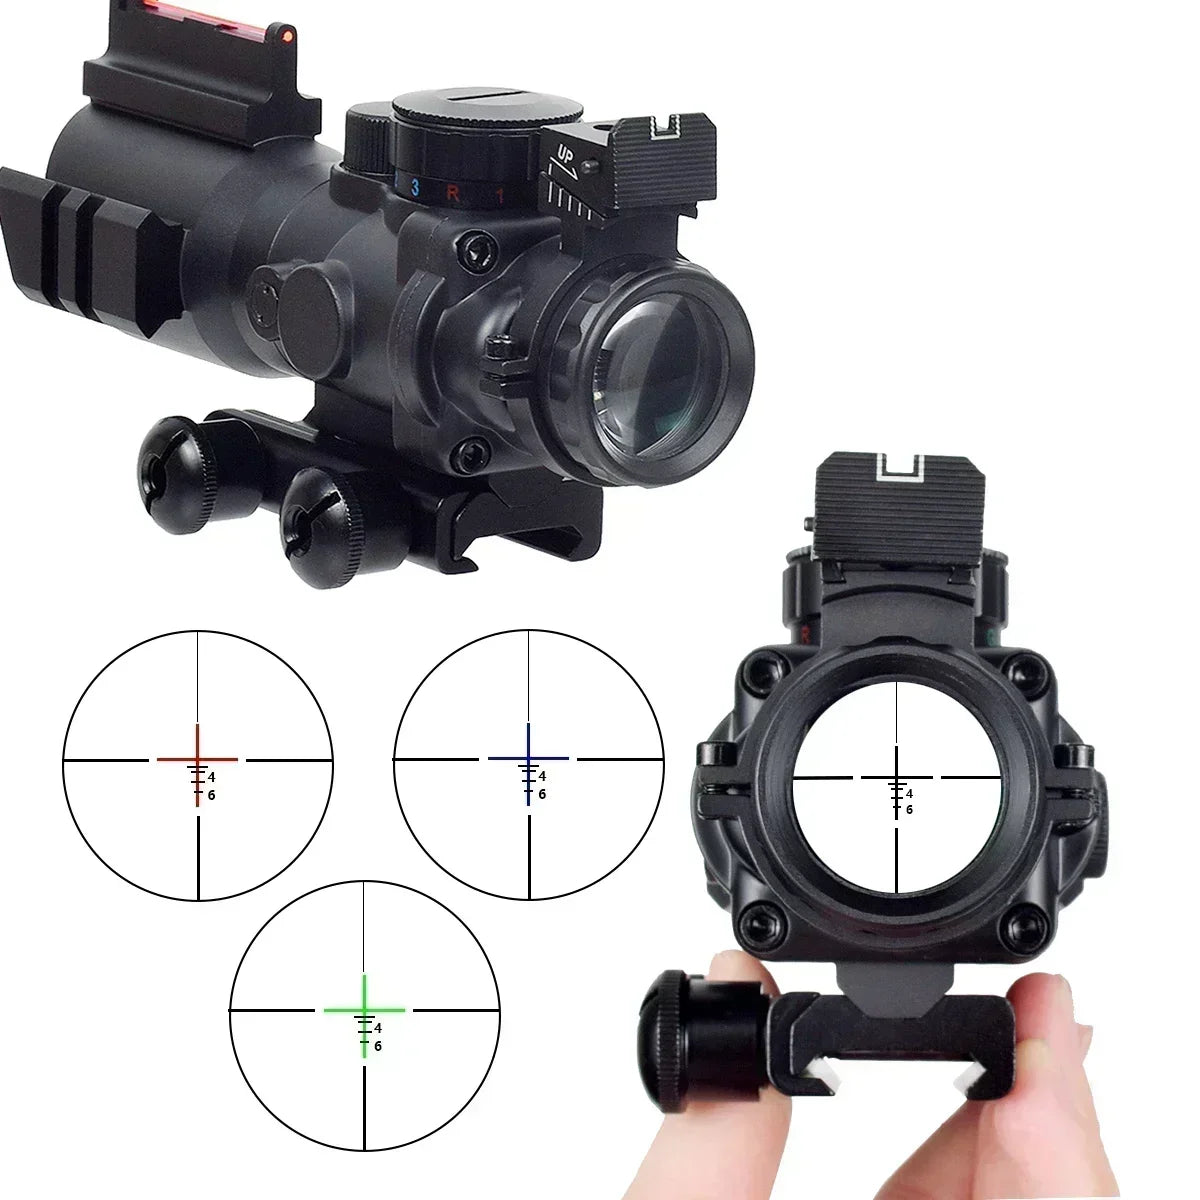  Tactical Trijicon ACOG 4X32 1x32 Scope Red Green Sight Airsoft Optics Illuminated Chevron Cross Glass Etched Reticle 